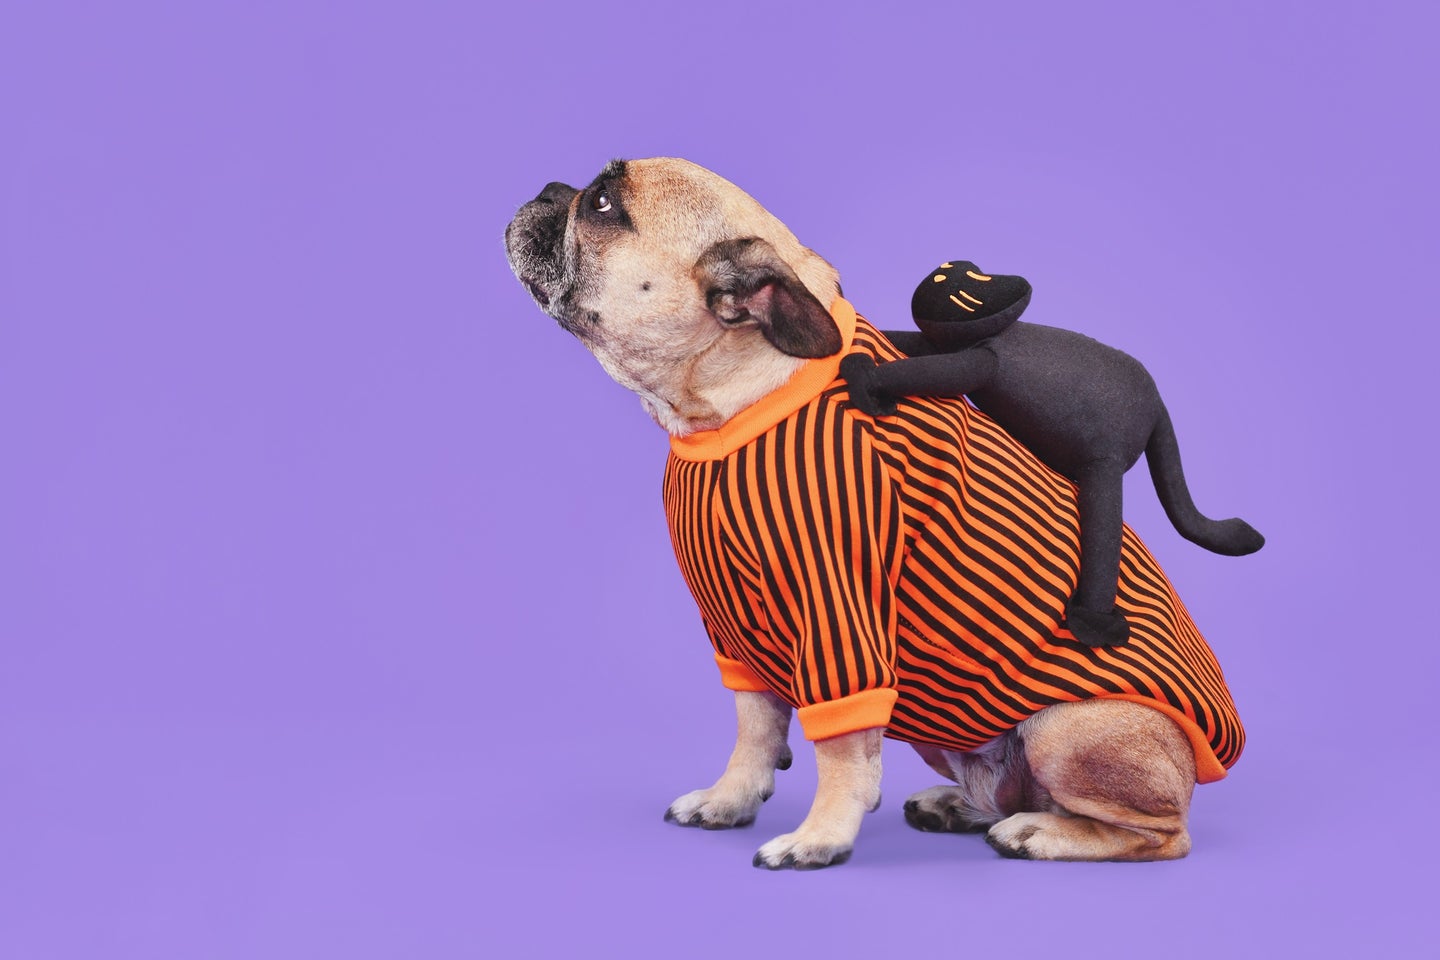 French bulldog in orange striped Halloween costume with black cat on its back against purple background